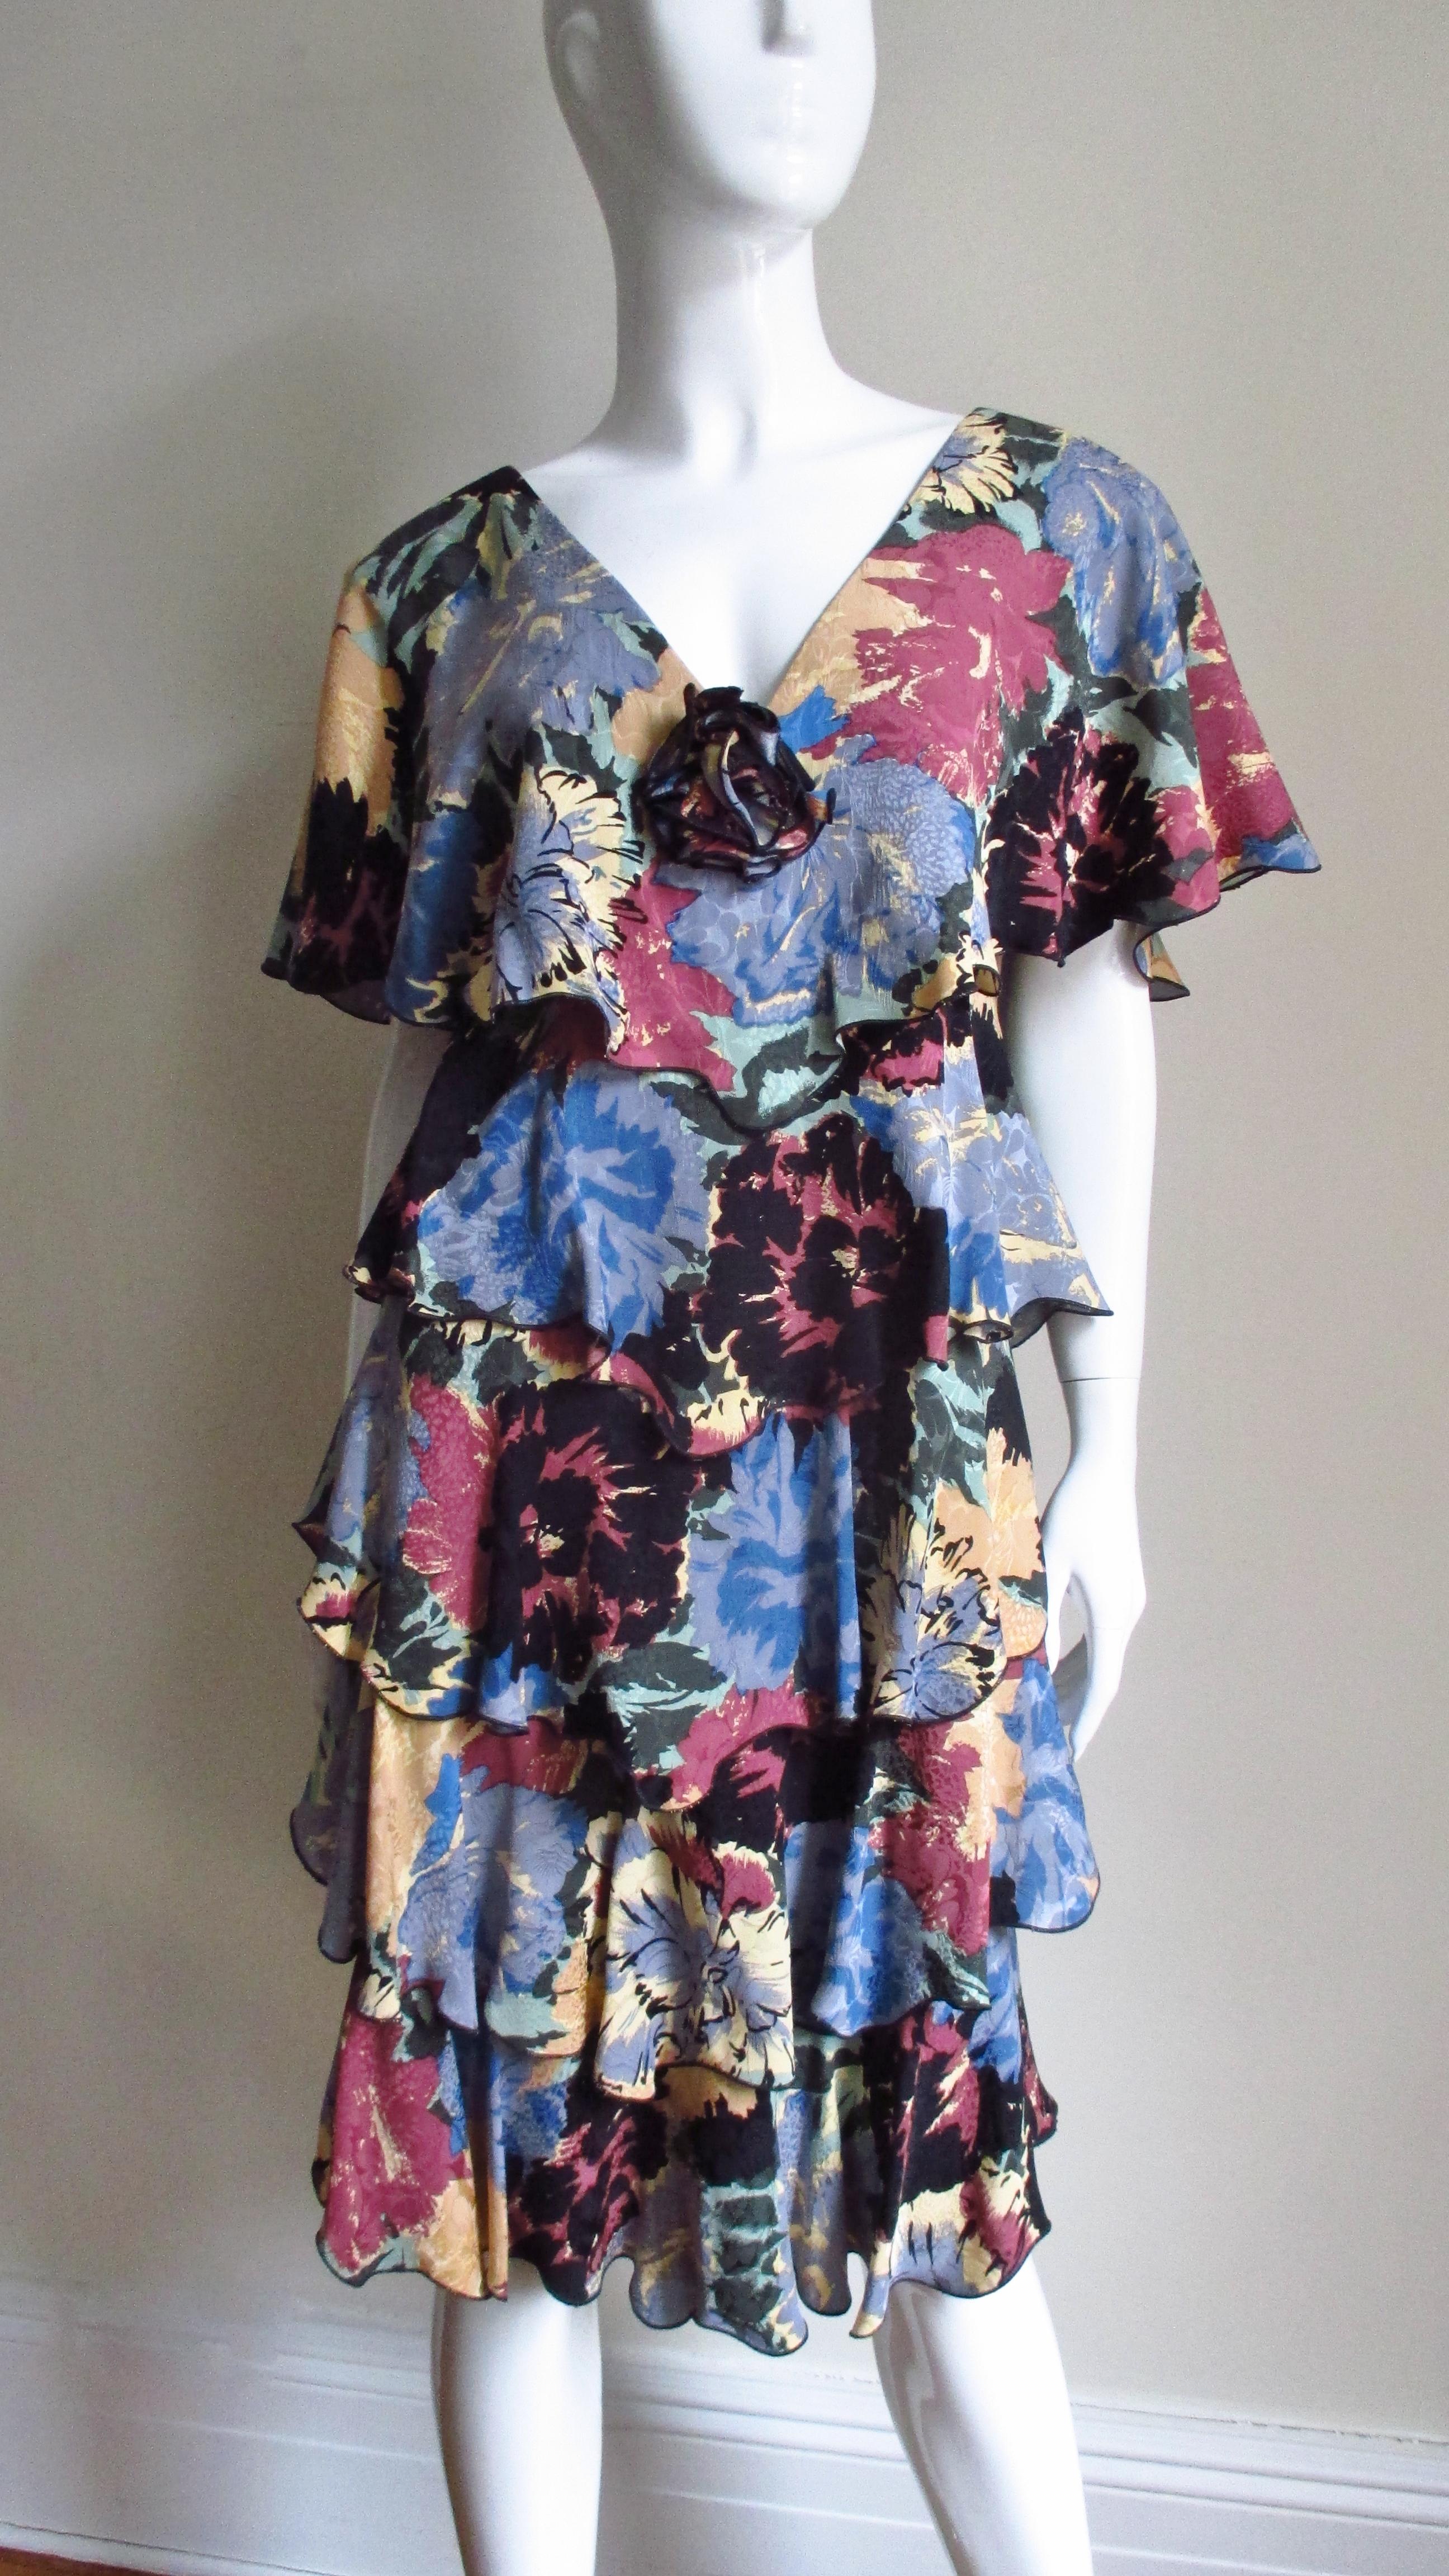 A feminine silk dress in a blue, pink, yellow and black flower pattern from notable American designer Holly Harp.  It has a V neckline front and back with 5 ruffles draping horizontally around the circumference of the dress from shoulders to the